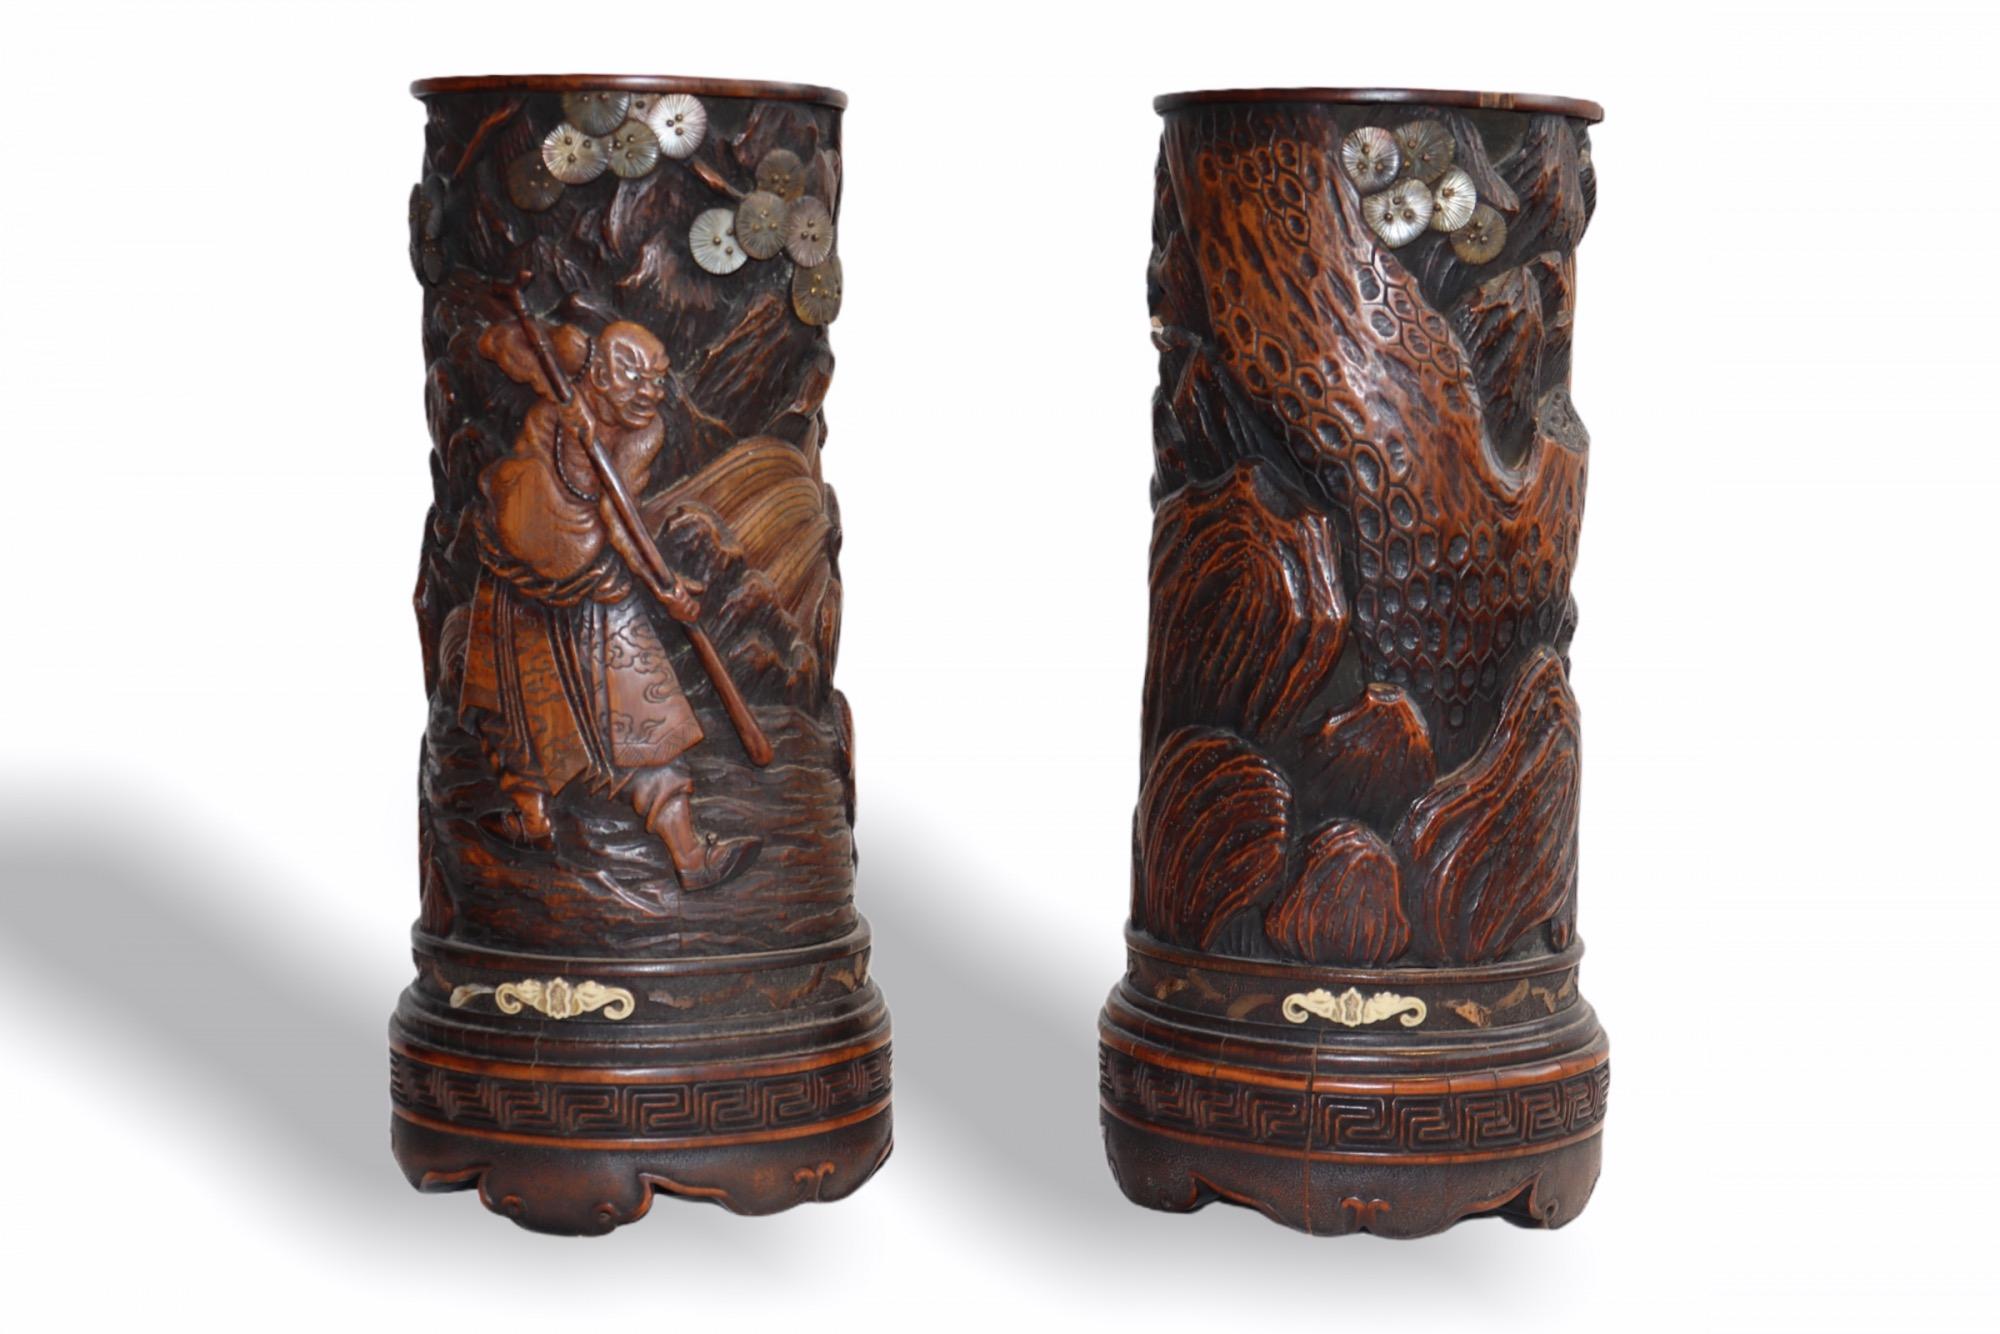 Qing Monumental Pair of Chinese Carved Wood Brush Pots, Late 18th Century